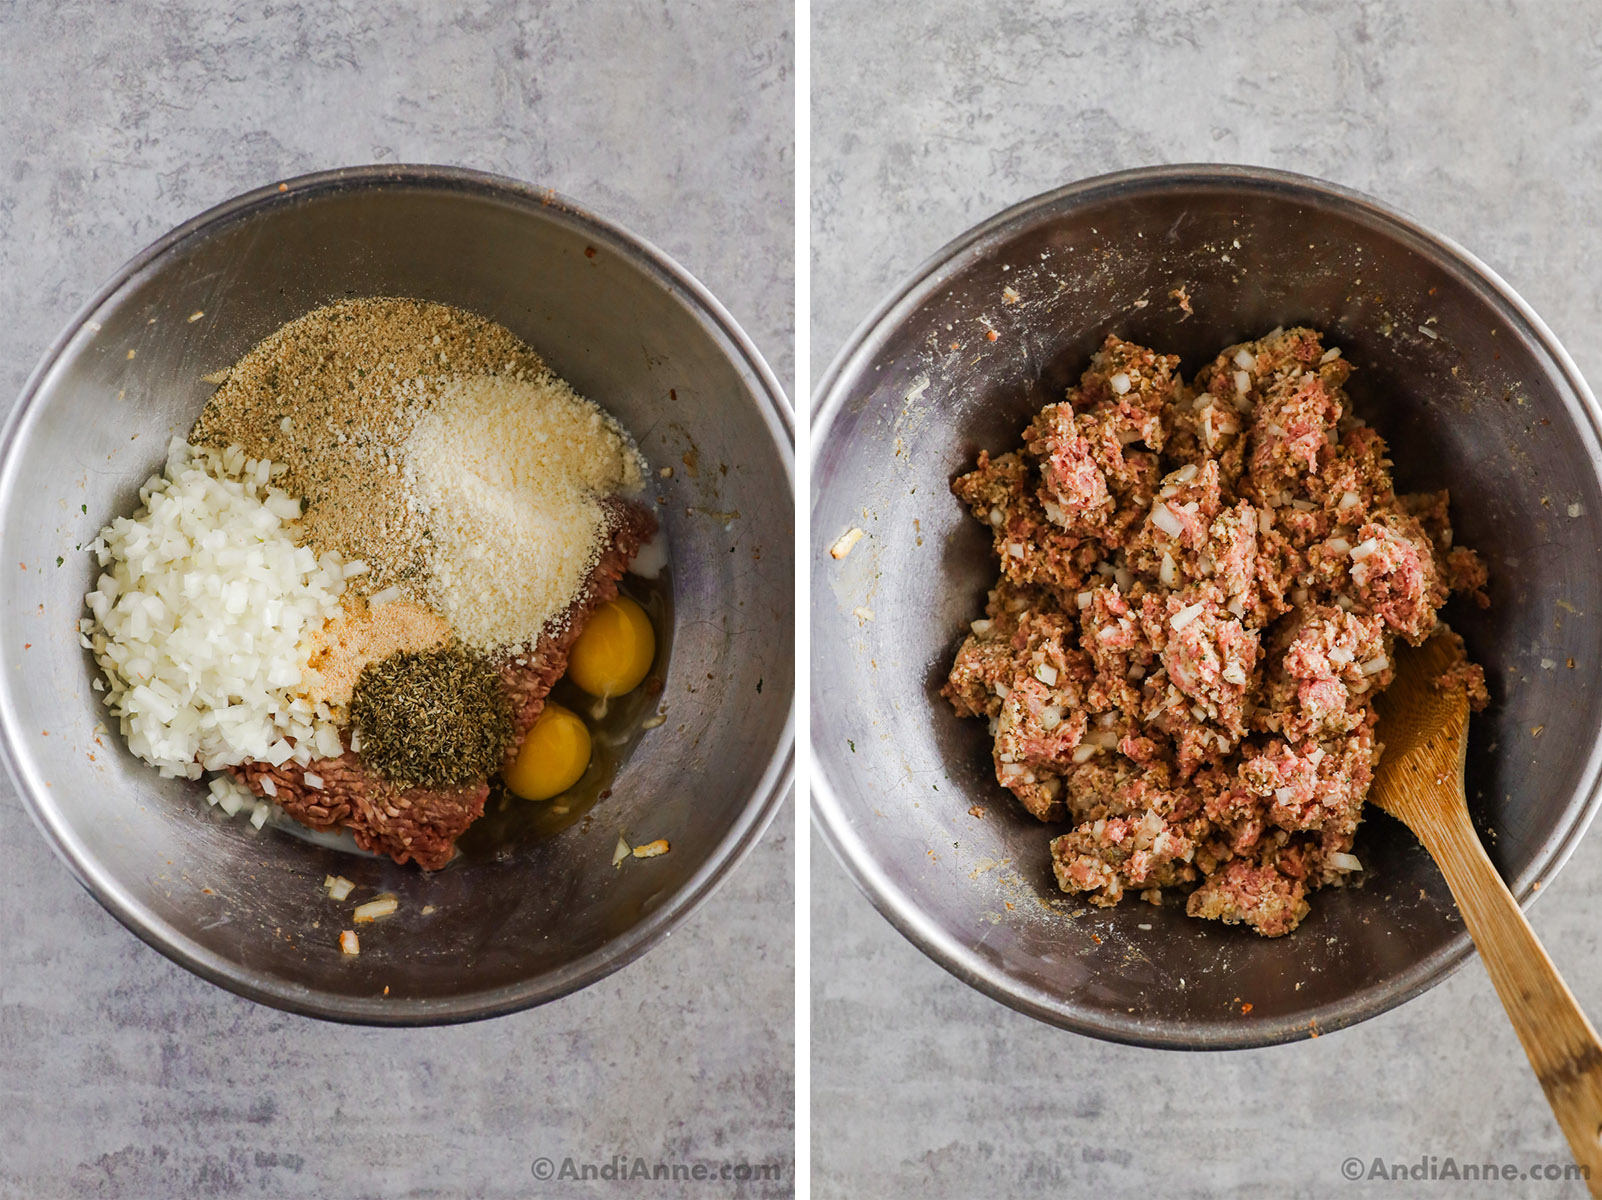 Two images of a large steel bowl, first with ingredients to make meatloaf dumped in. Second with meatloaf ingredients mixed together.